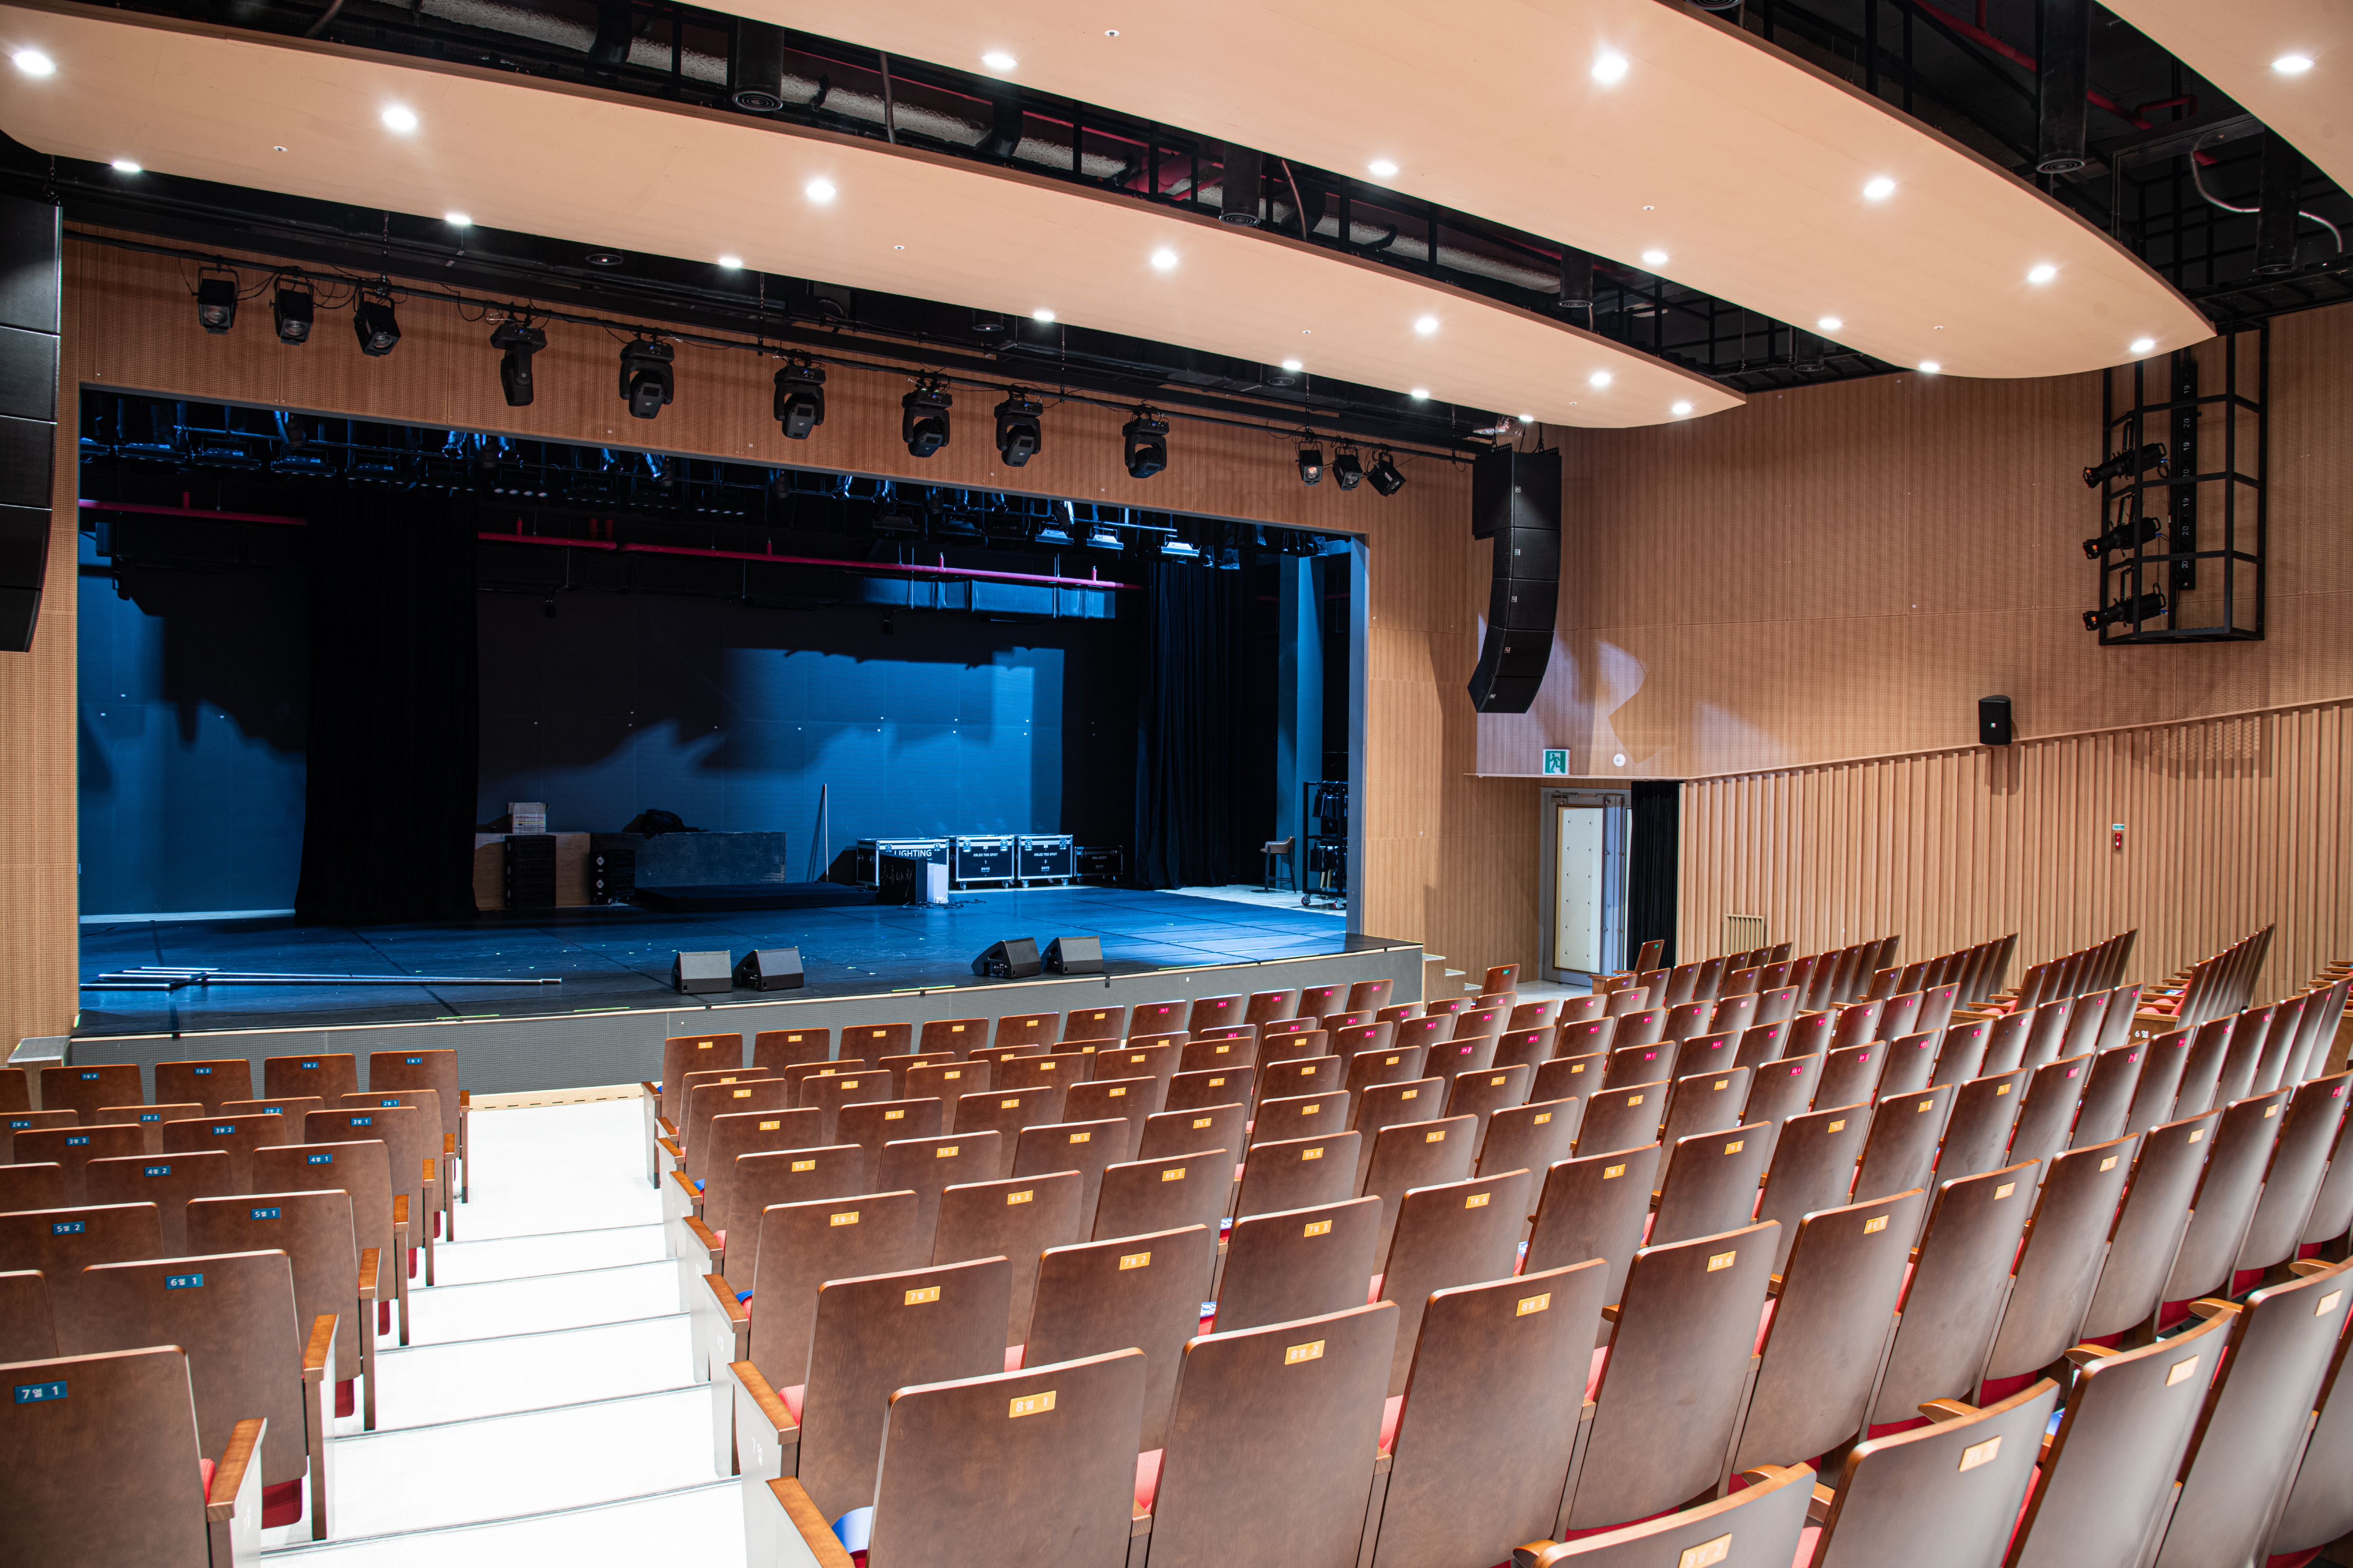 Seoul Seongbuk Media Culture Maru3 : Auditorium that can be used for various cultural performances and gatherings
